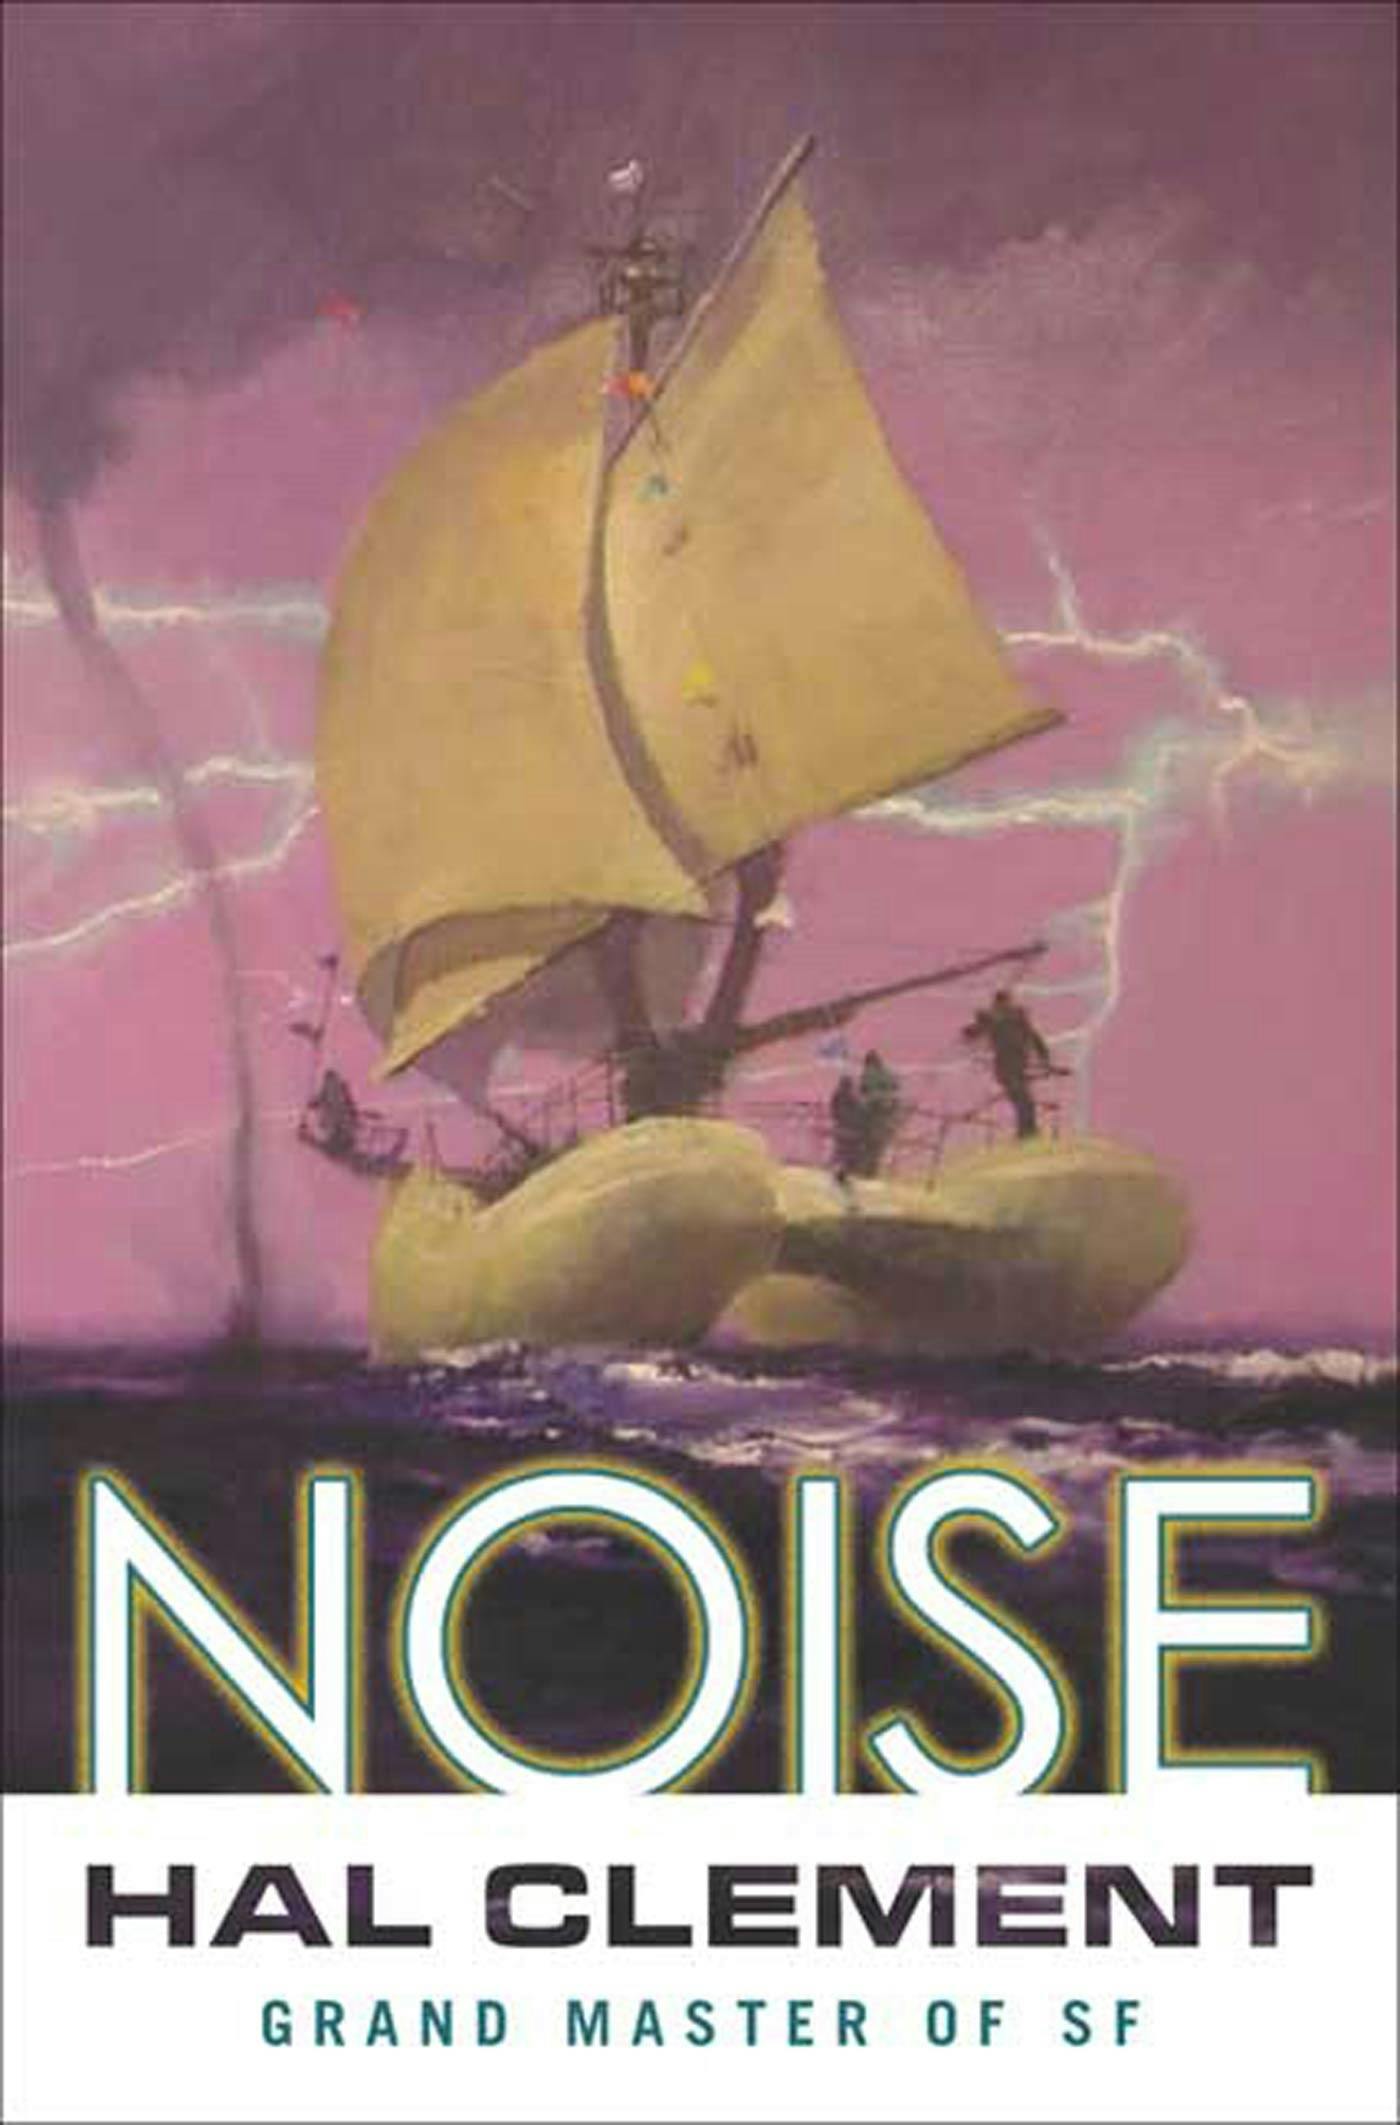 Cover for the book titled as: Noise